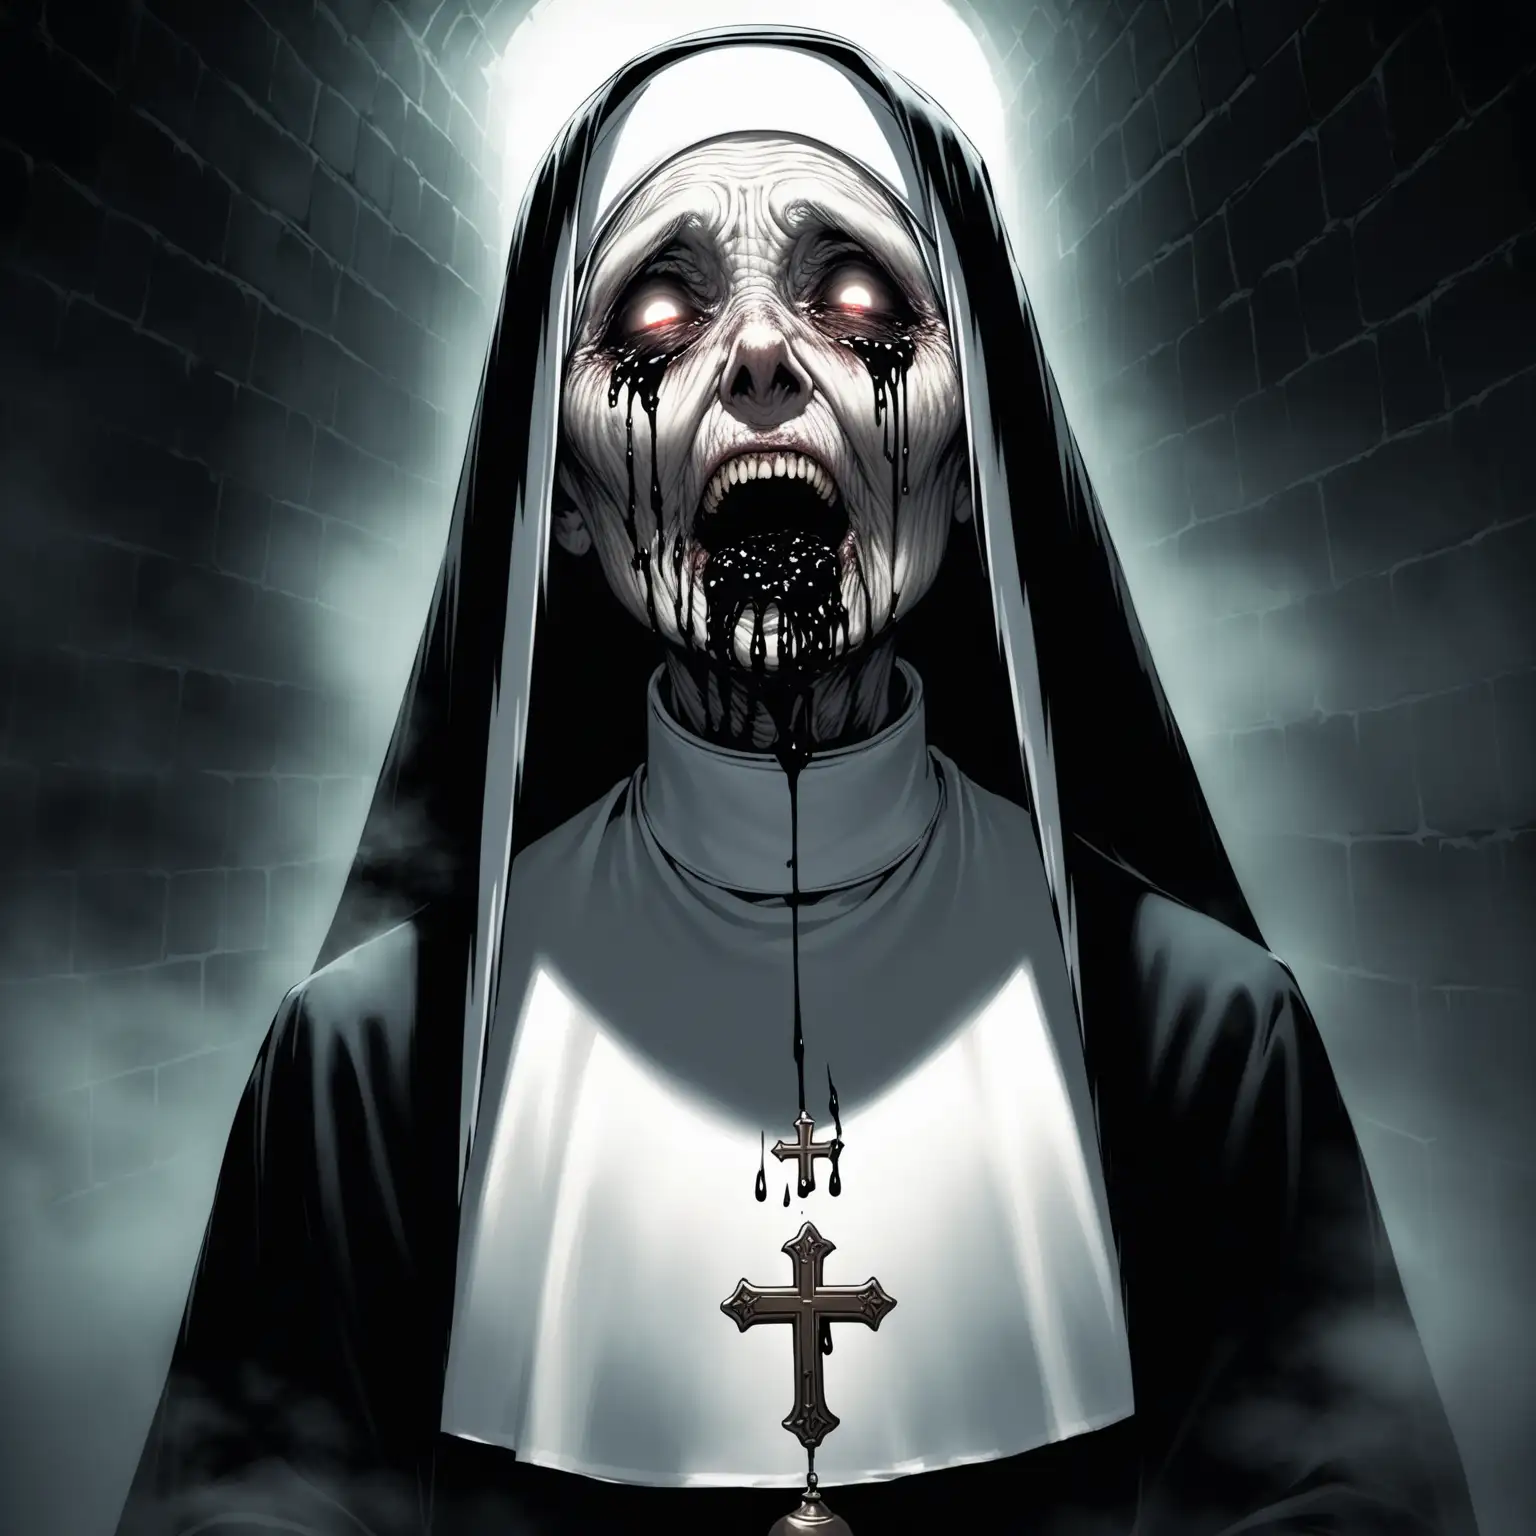 Elderly Catholic Nun in Monastery Cell with Horror Atmosphere